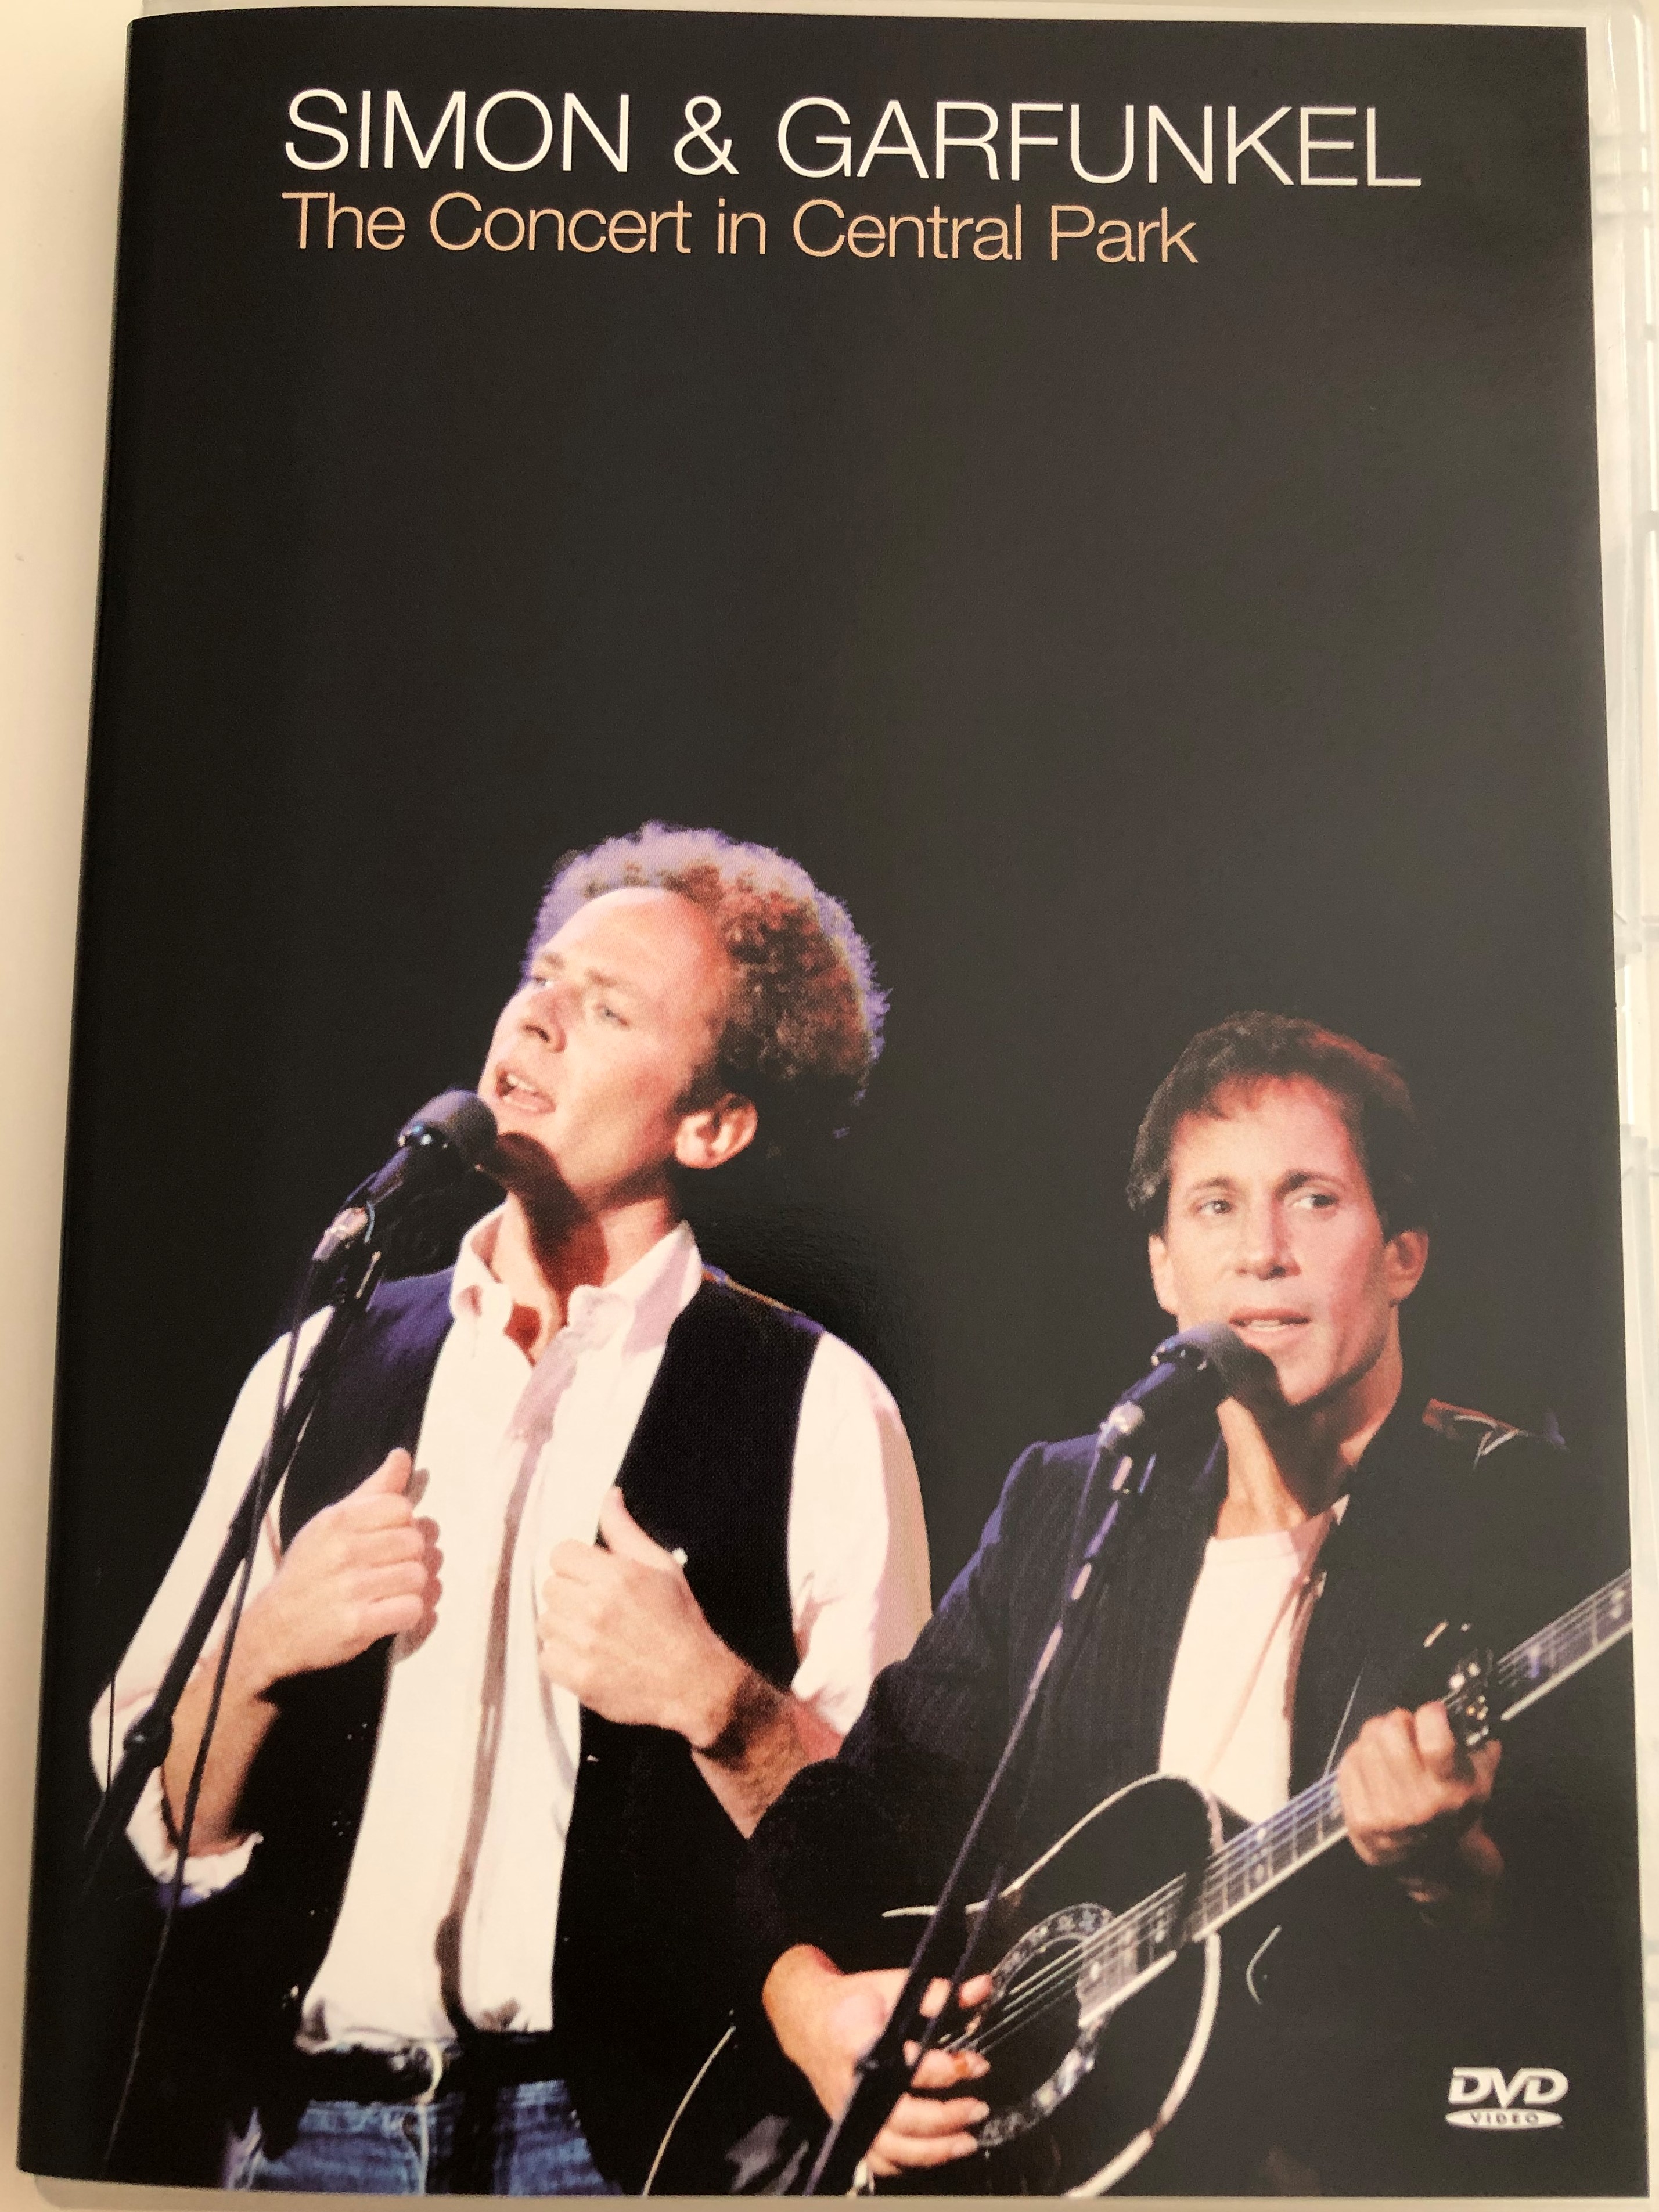 simon-garfunkel-the-concert-in-central-park-dvd-2003-recorded-live-on-september-19-1981-mrs.-robinson-american-tune-late-in-the-evening-columbia-202223-9-1-.jpg